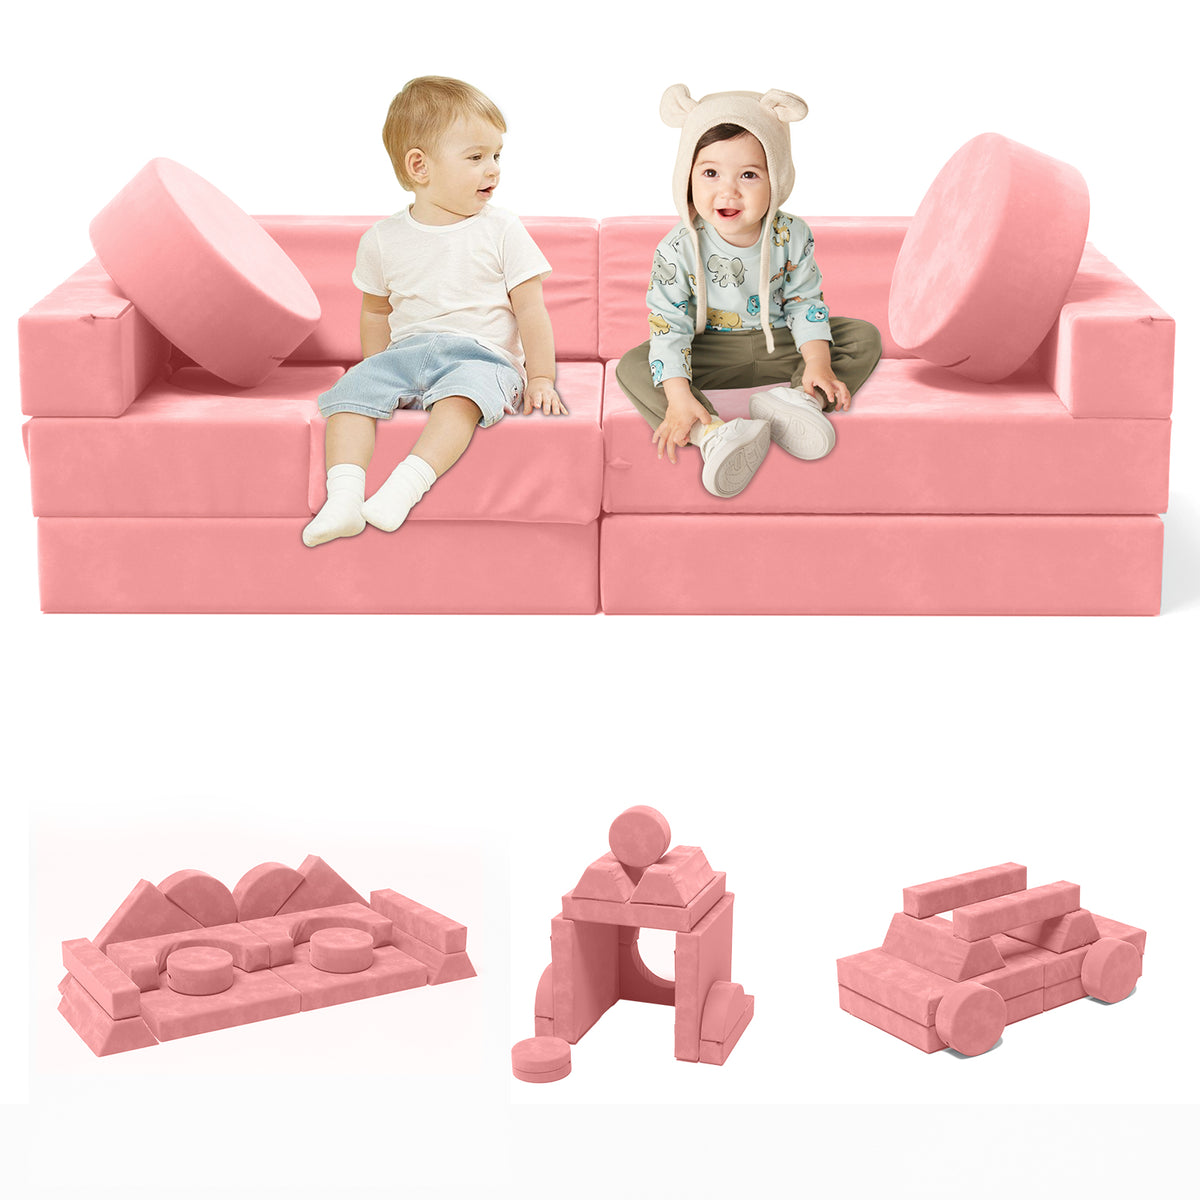 XJD 14-Piece Modular Kids Play Couch Set, Children's Combination Sofa, Bedroom and Playroom Children's Furniture, Convertible Foam and Floor Cushions, Pink